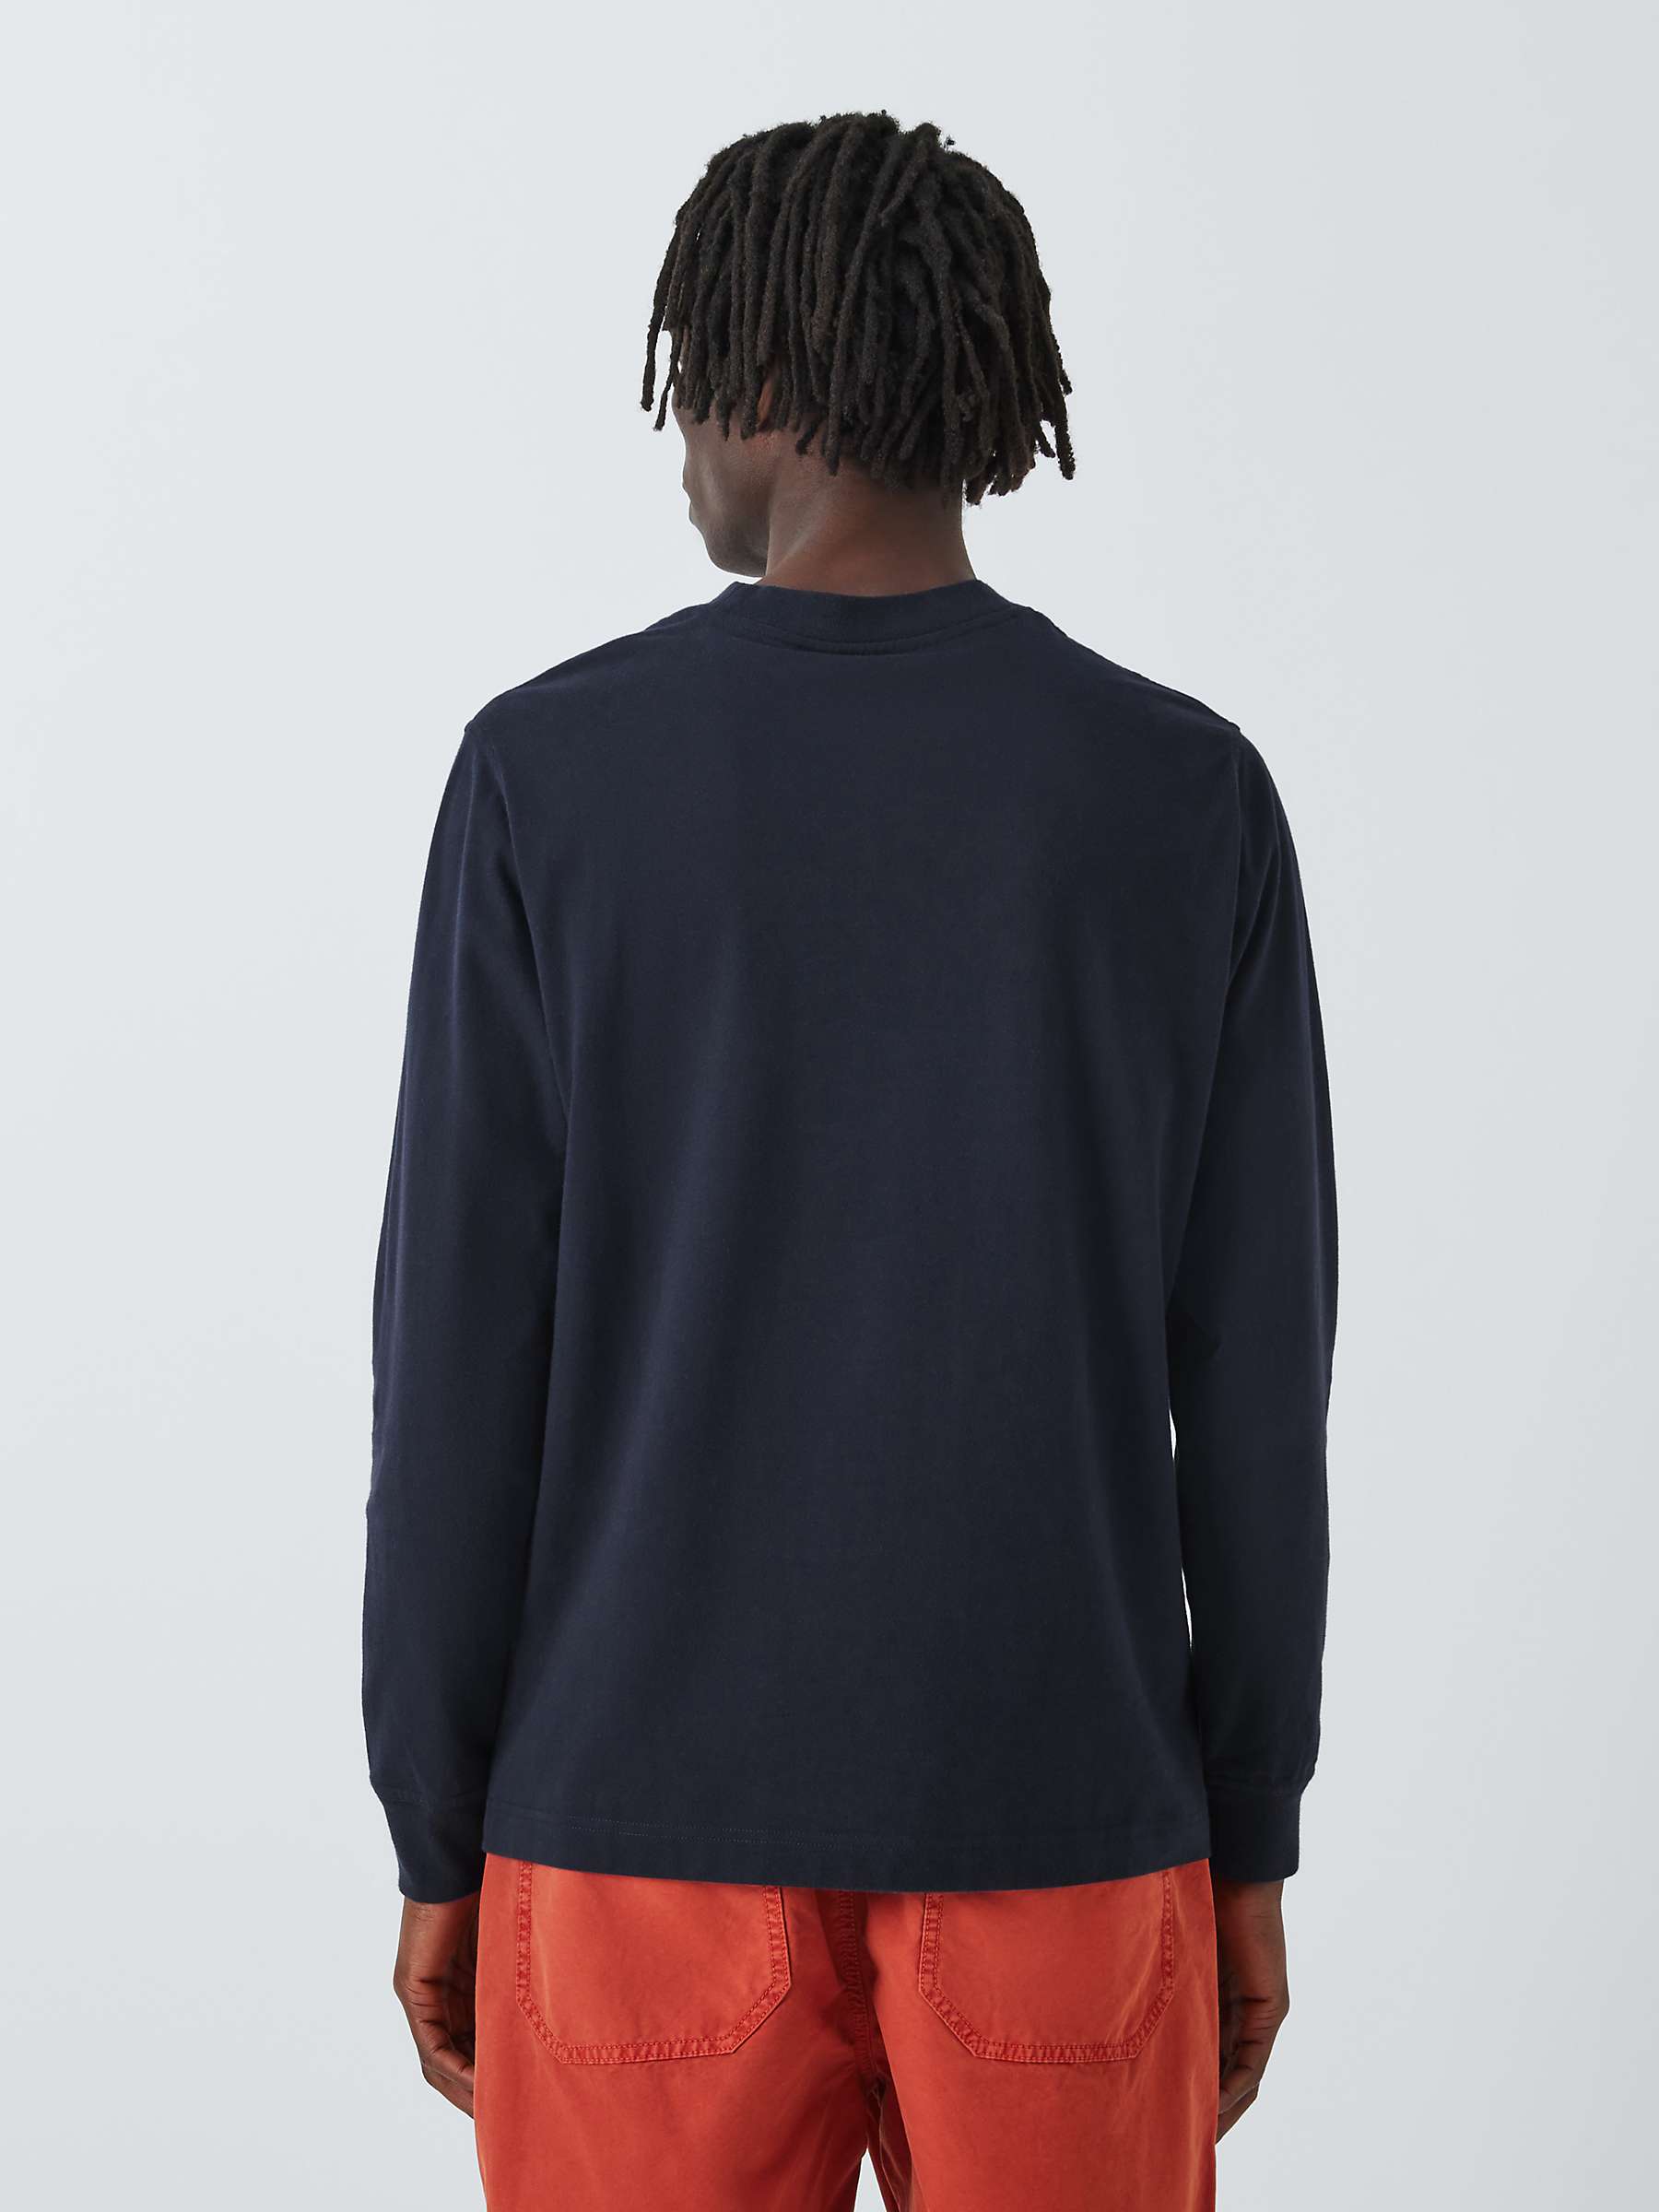 Buy Barbour Tomorrow's Archive Arbour Long Sleeve T-Shirt, Navy Online at johnlewis.com